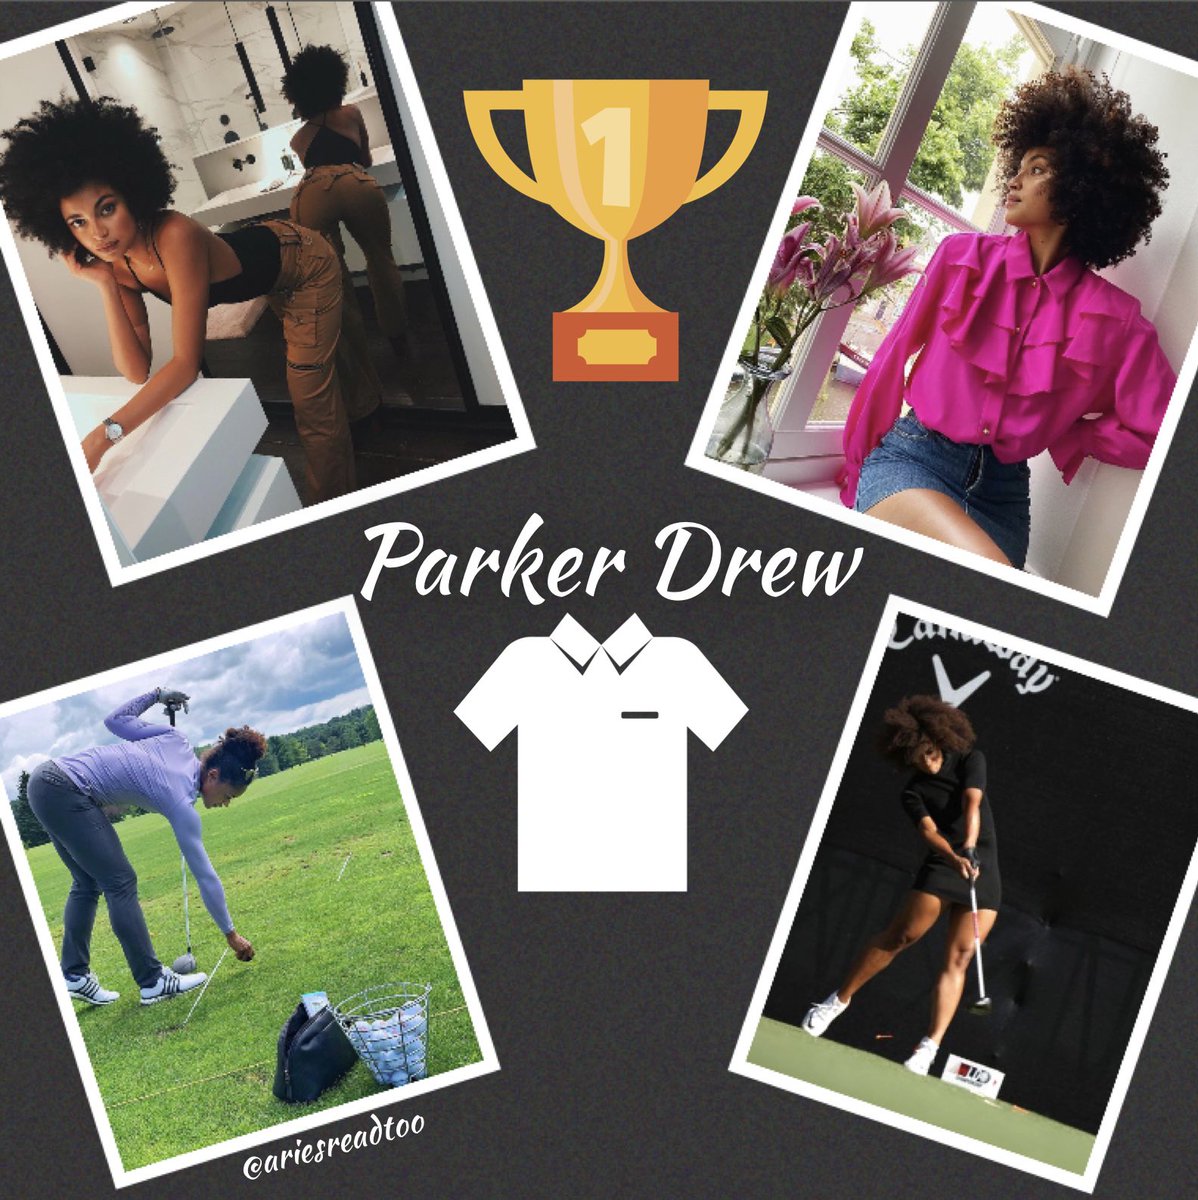 Parker’s best friends are back and they bring all the jokes. They call Kelly Mr. Sheffield, ‘The Nanny’ references are too good . The golf references applied to Parker’s life are perfecto! It’s important to have representation of Black women in golf 